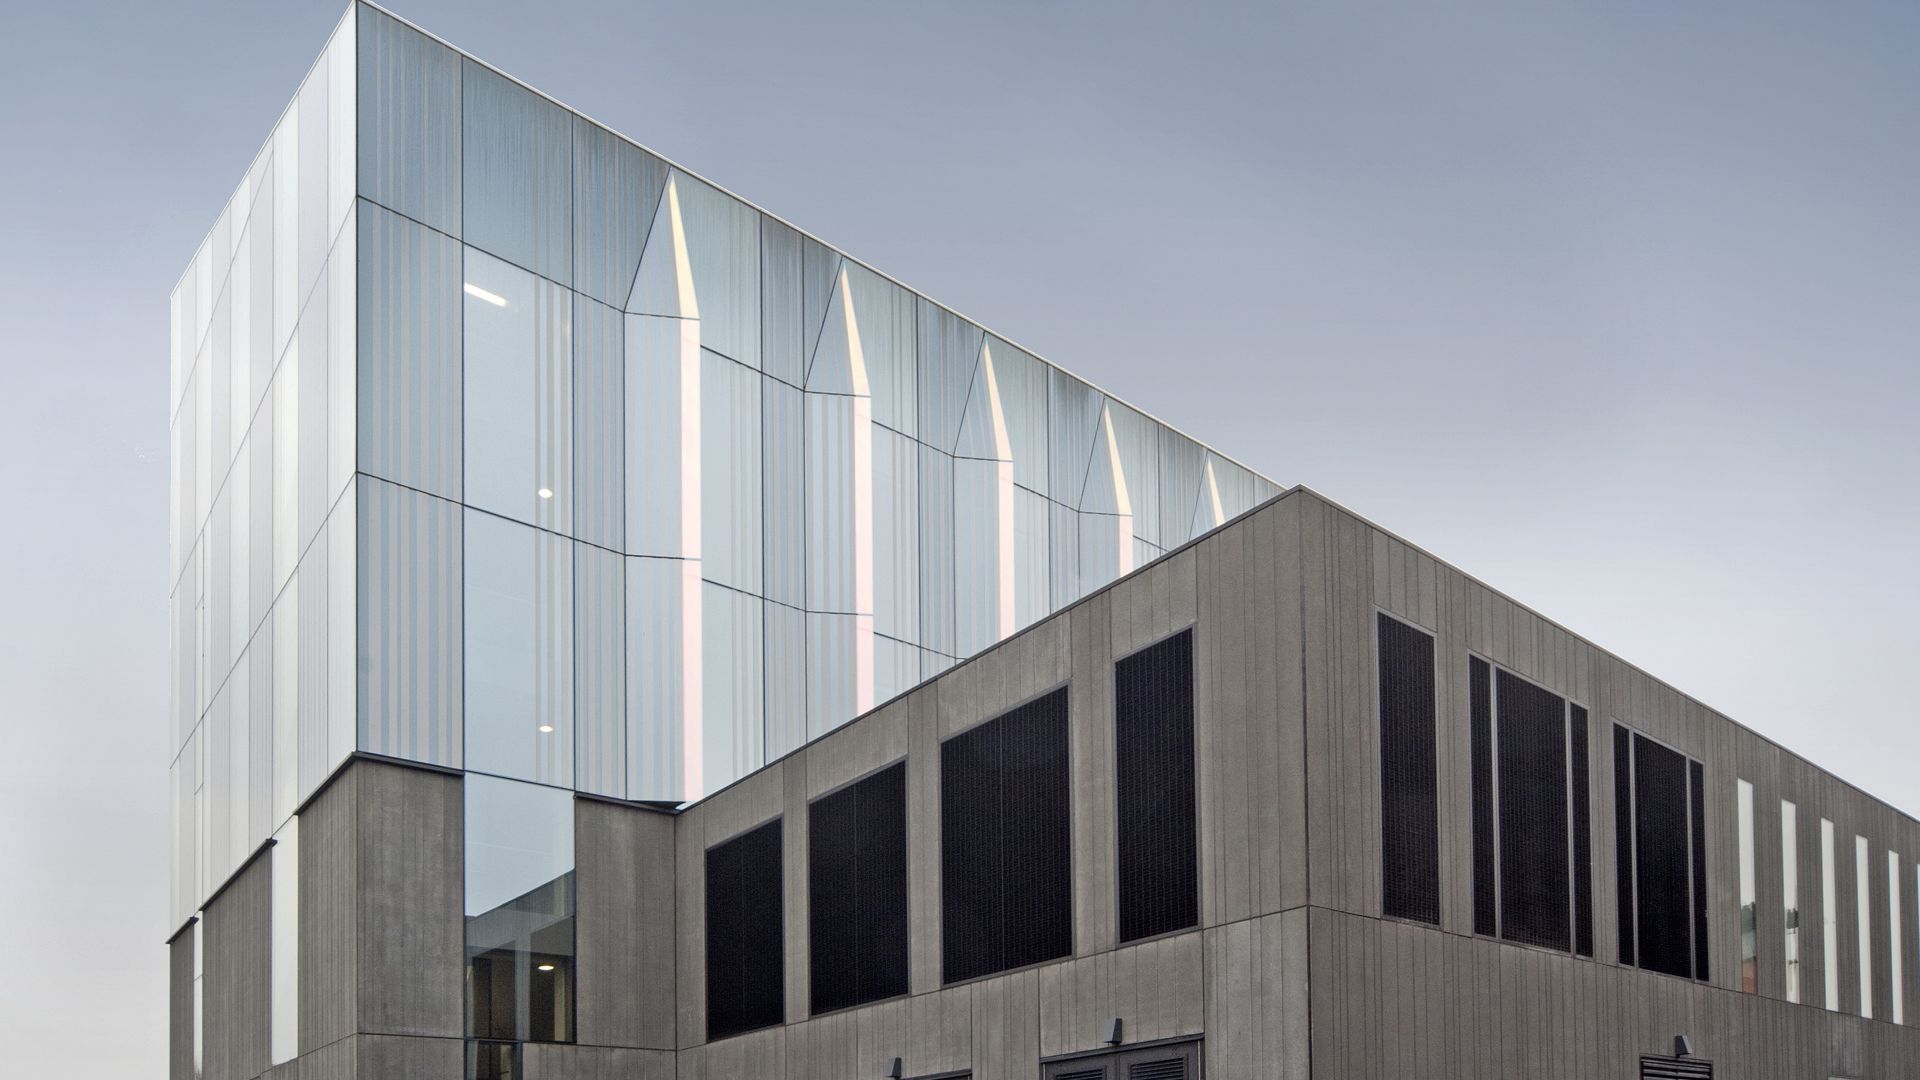 Architectural concrete facade of Manchester Metropolitan University produced with Sika concrete admixtures